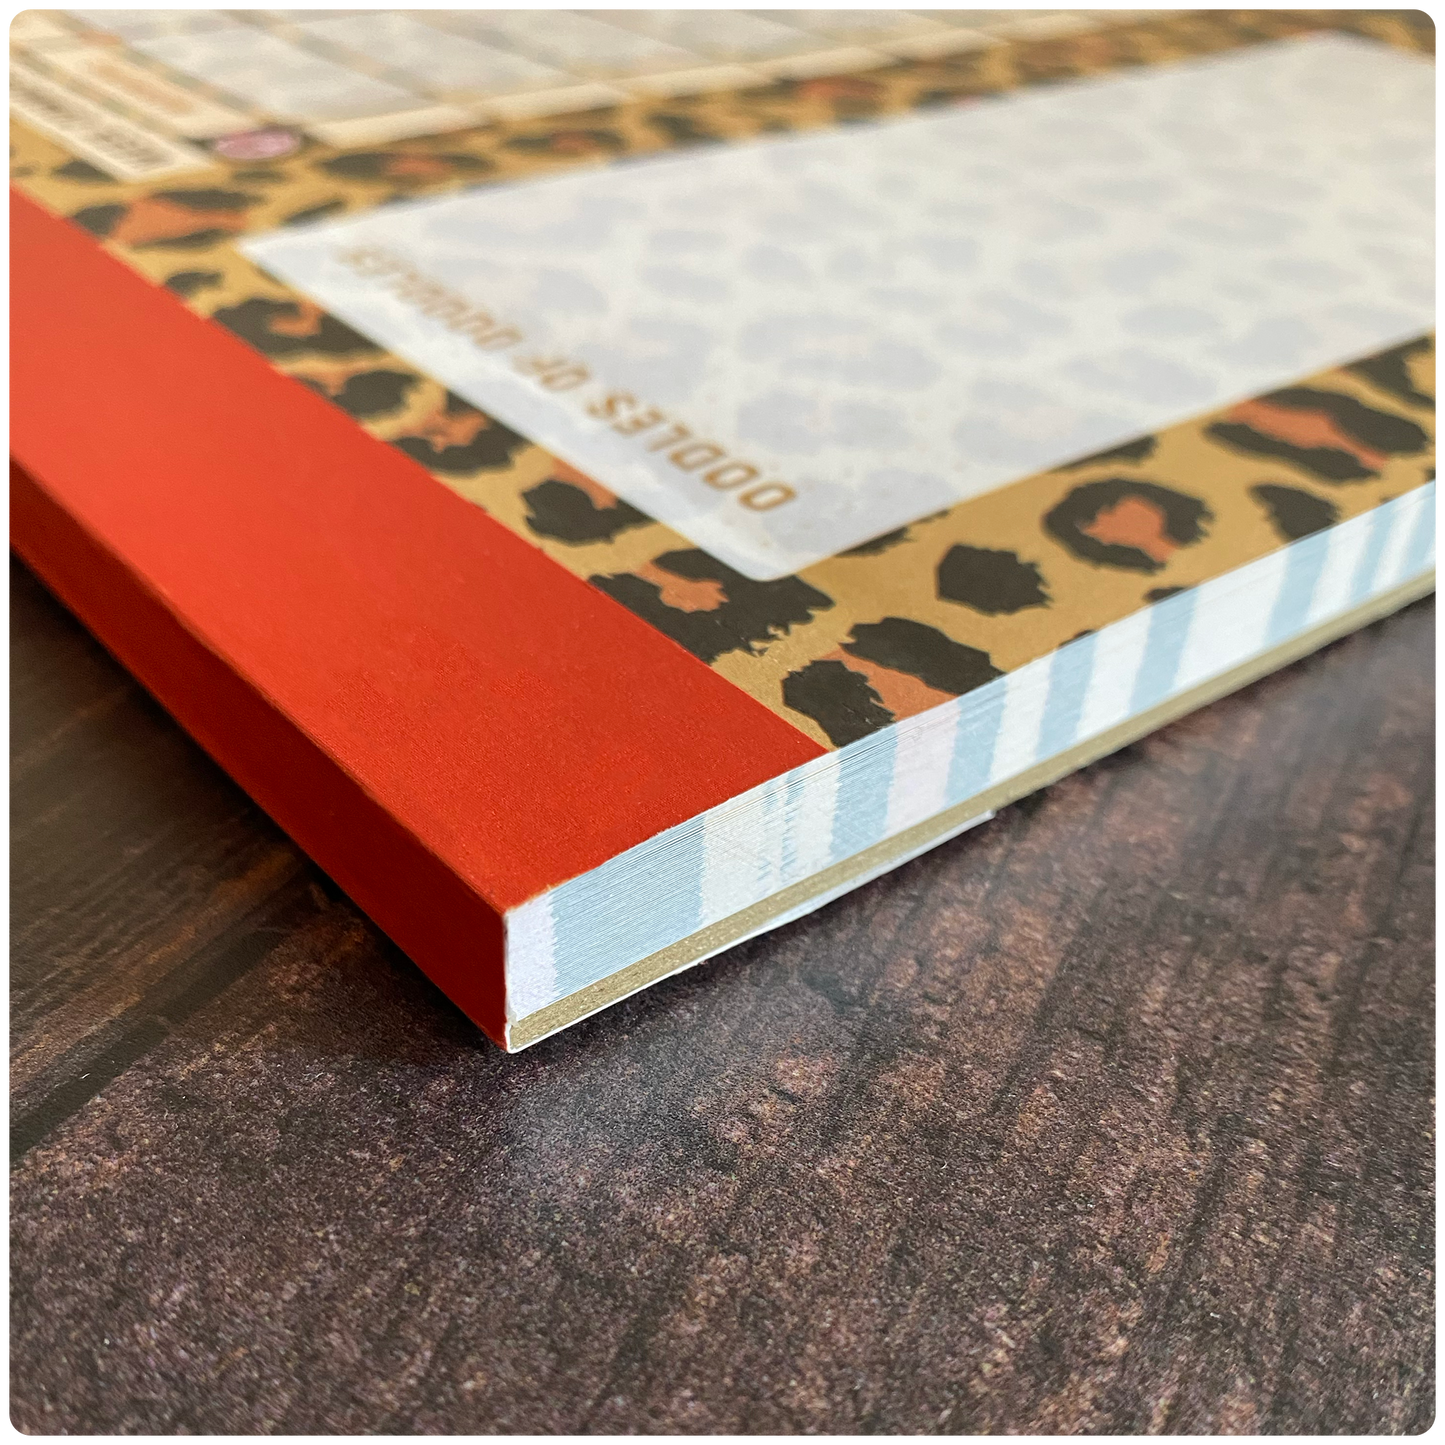 A4 - Yearly Planning Pad - Exotic Leopard